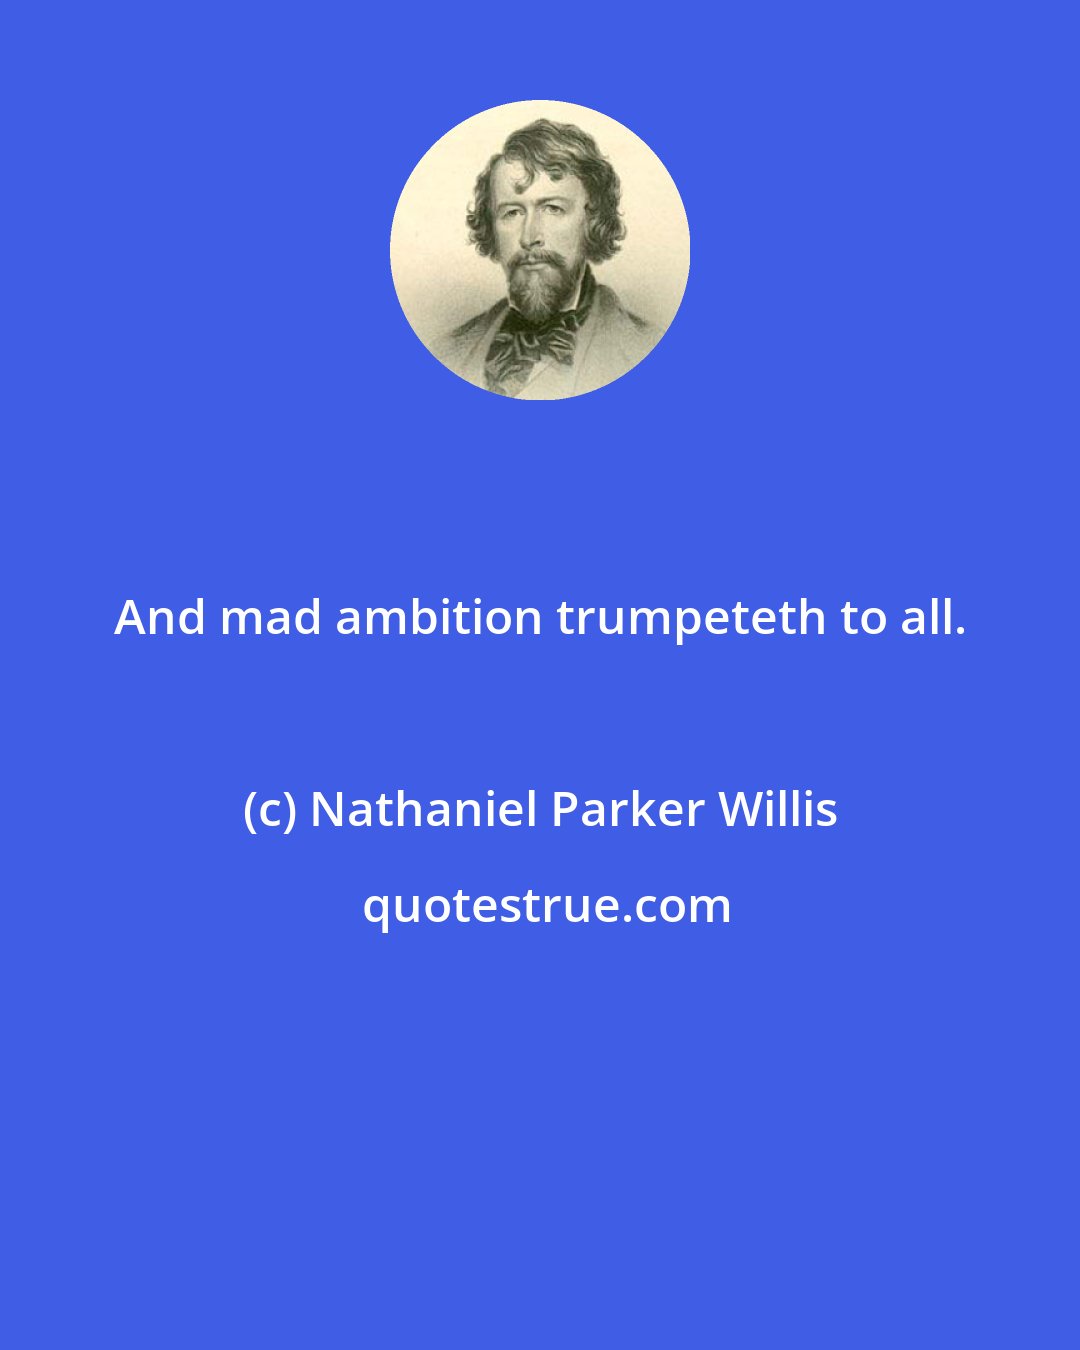 Nathaniel Parker Willis: And mad ambition trumpeteth to all.